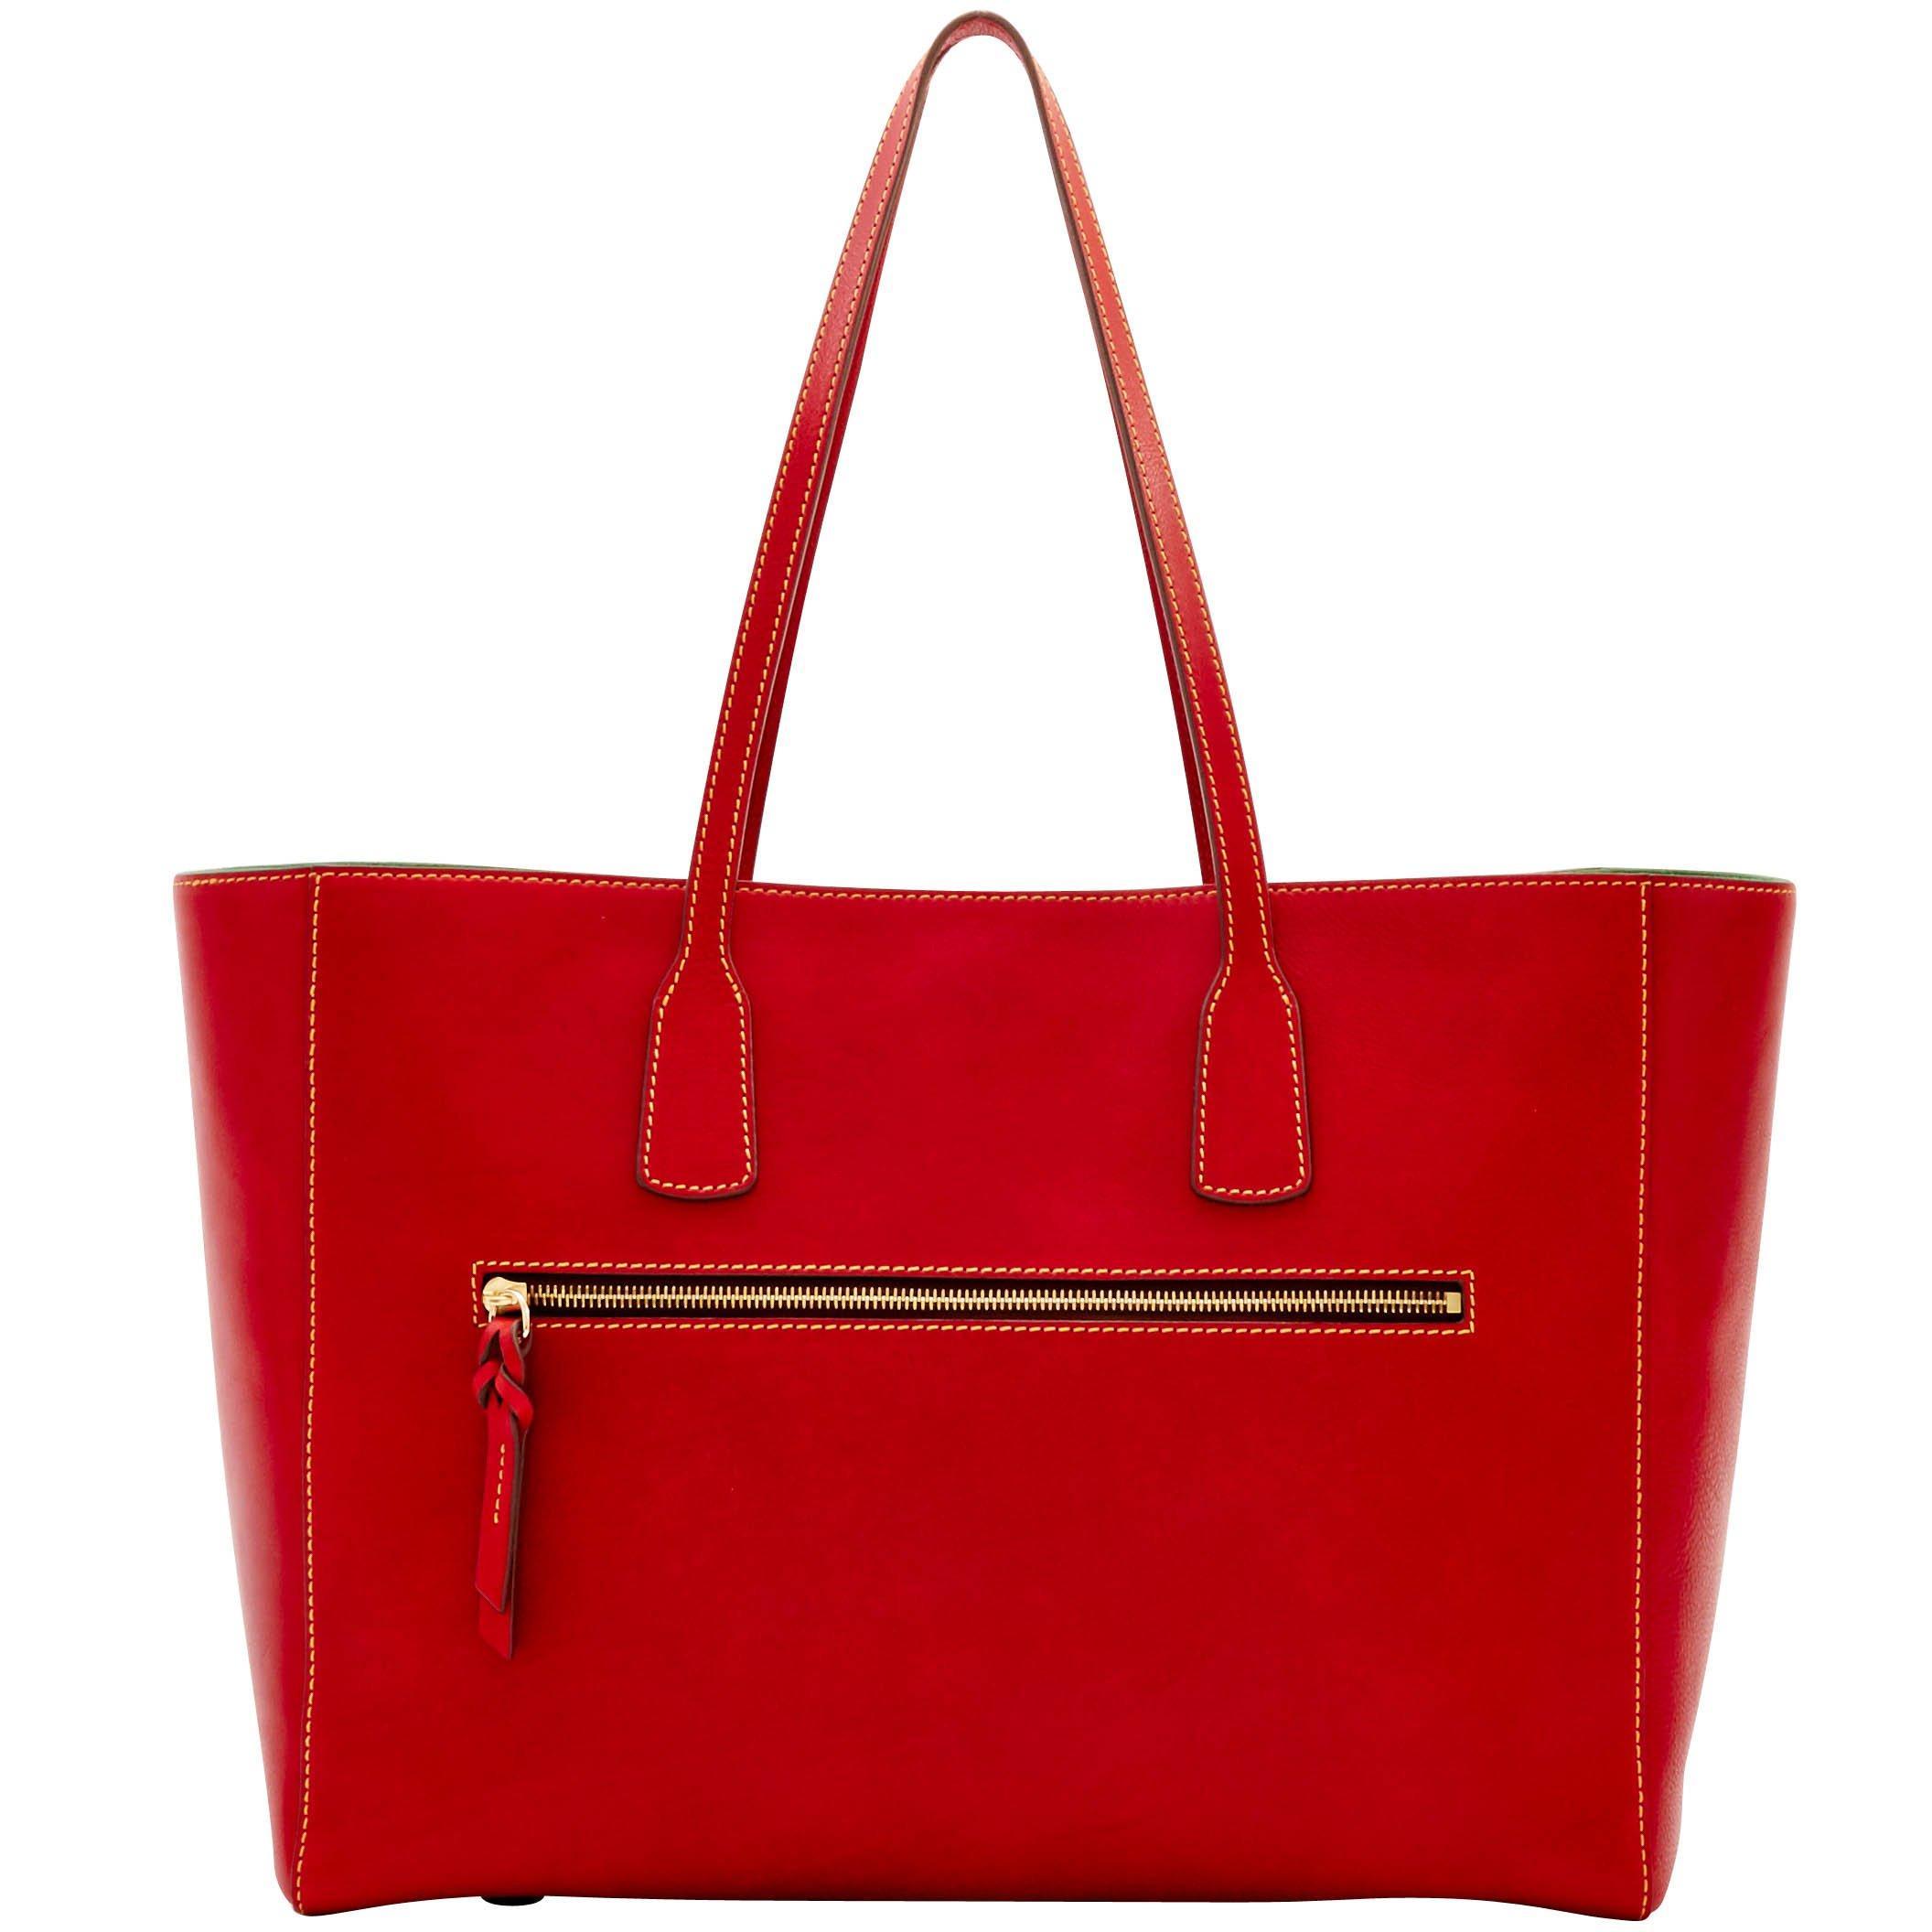 Dooney & Bourke Leather Florentine Large Ashton Tote in Red - Save 25% ...